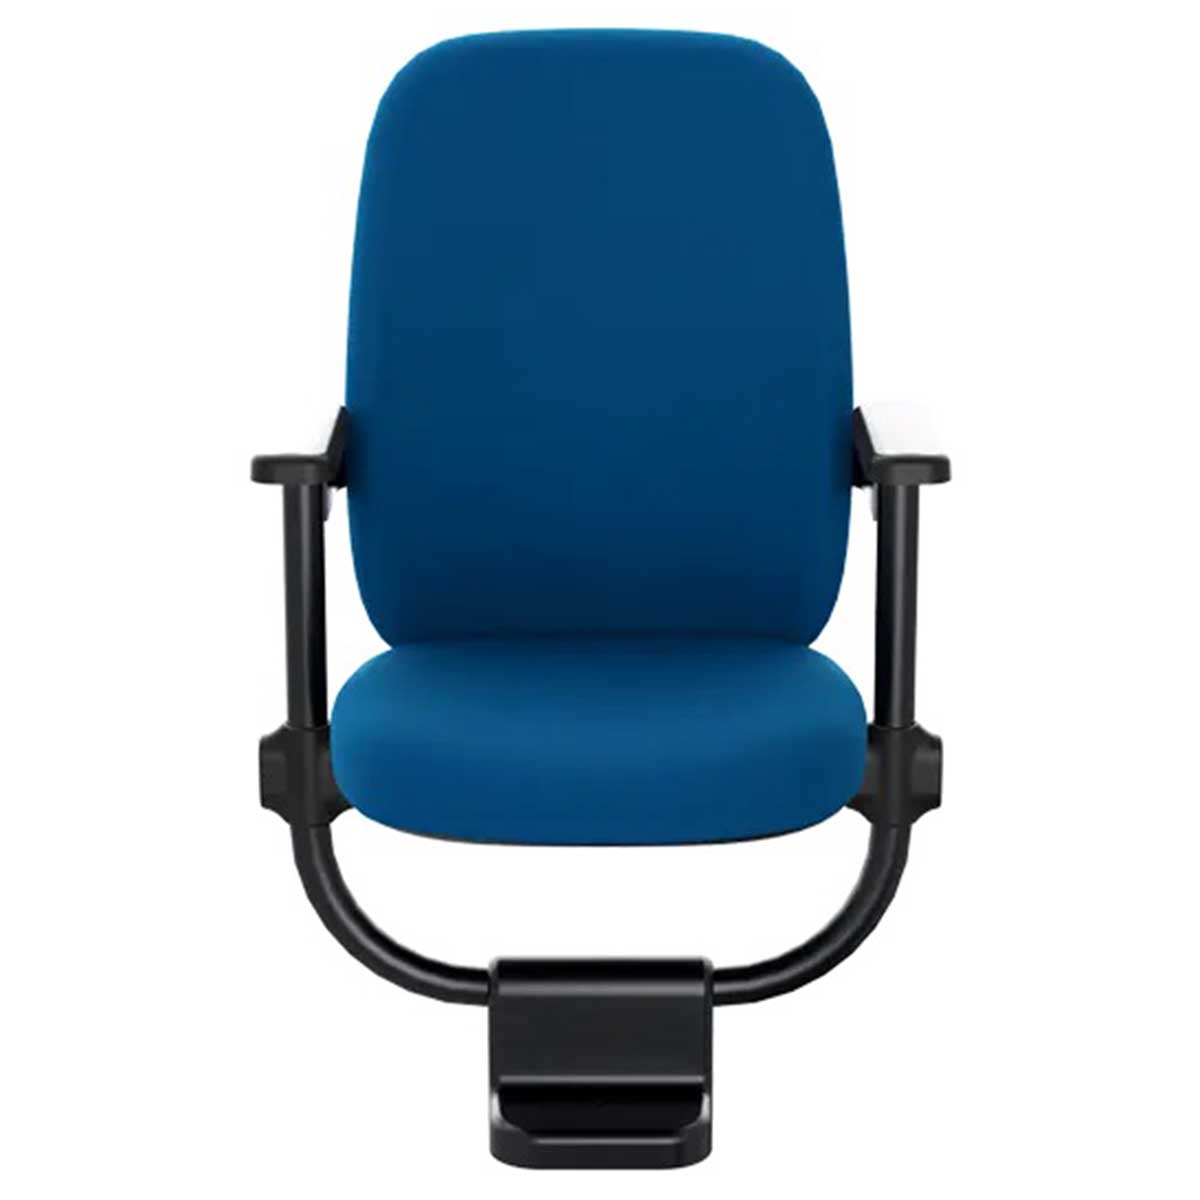 Push Back Chair Manufacturers, Suppliers in Noida Sector 92